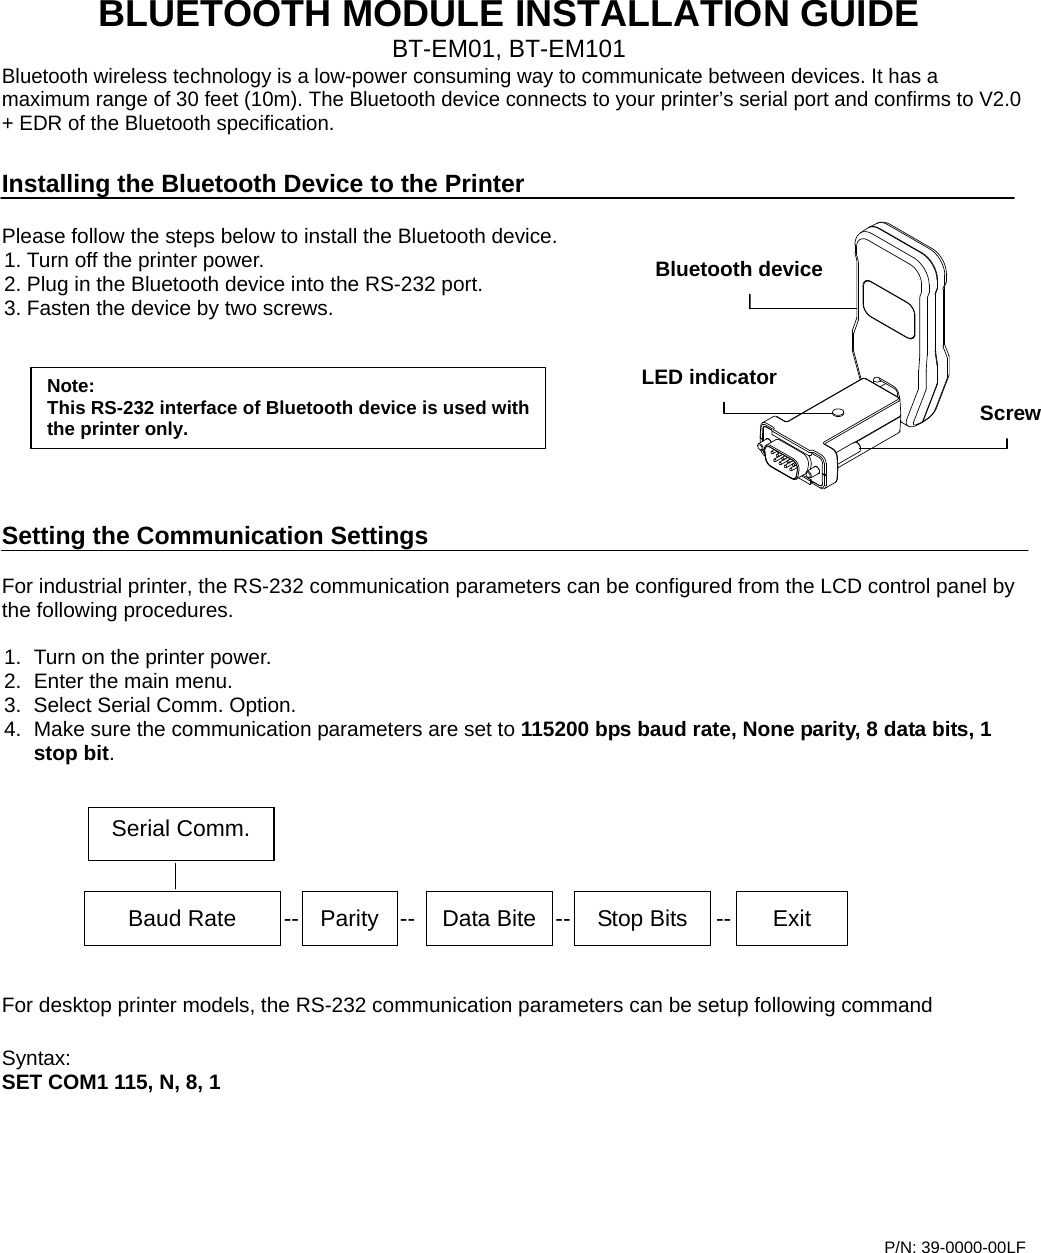    BLUETOOTH MODULE INSTALLATION GUIDE BT-EM01, BT-EM101 Bluetooth wireless technology is a low-power consuming way to communicate between devices. It has a maximum range of 30 feet (10m). The Bluetooth device connects to your printer’s serial port and confirms to V2.0 + EDR of the Bluetooth specification.  Installing the Bluetooth Device to the Printer  Please follow the steps below to install the Bluetooth device. 1. Turn off the printer power. 2. Plug in the Bluetooth device into the RS-232 port.   3. Fasten the device by two screws.        Setting the Communication Settings  For industrial printer, the RS-232 communication parameters can be configured from the LCD control panel by the following procedures.  1.  Turn on the printer power. 2.  Enter the main menu. 3.  Select Serial Comm. Option. 4.  Make sure the communication parameters are set to 115200 bps baud rate, None parity, 8 data bits, 1 stop bit.         For desktop printer models, the RS-232 communication parameters can be setup following command  Syntax:  SET COM1 115, N, 8, 1        P/N: 39-0000-00LF    Baud Rate  --  Parity  -- Data Bite -- Stop Bits  -- Exit Serial Comm.Bluetooth device ScrewLED indicator Note: This RS-232 interface of Bluetooth device is used with the printer only. 